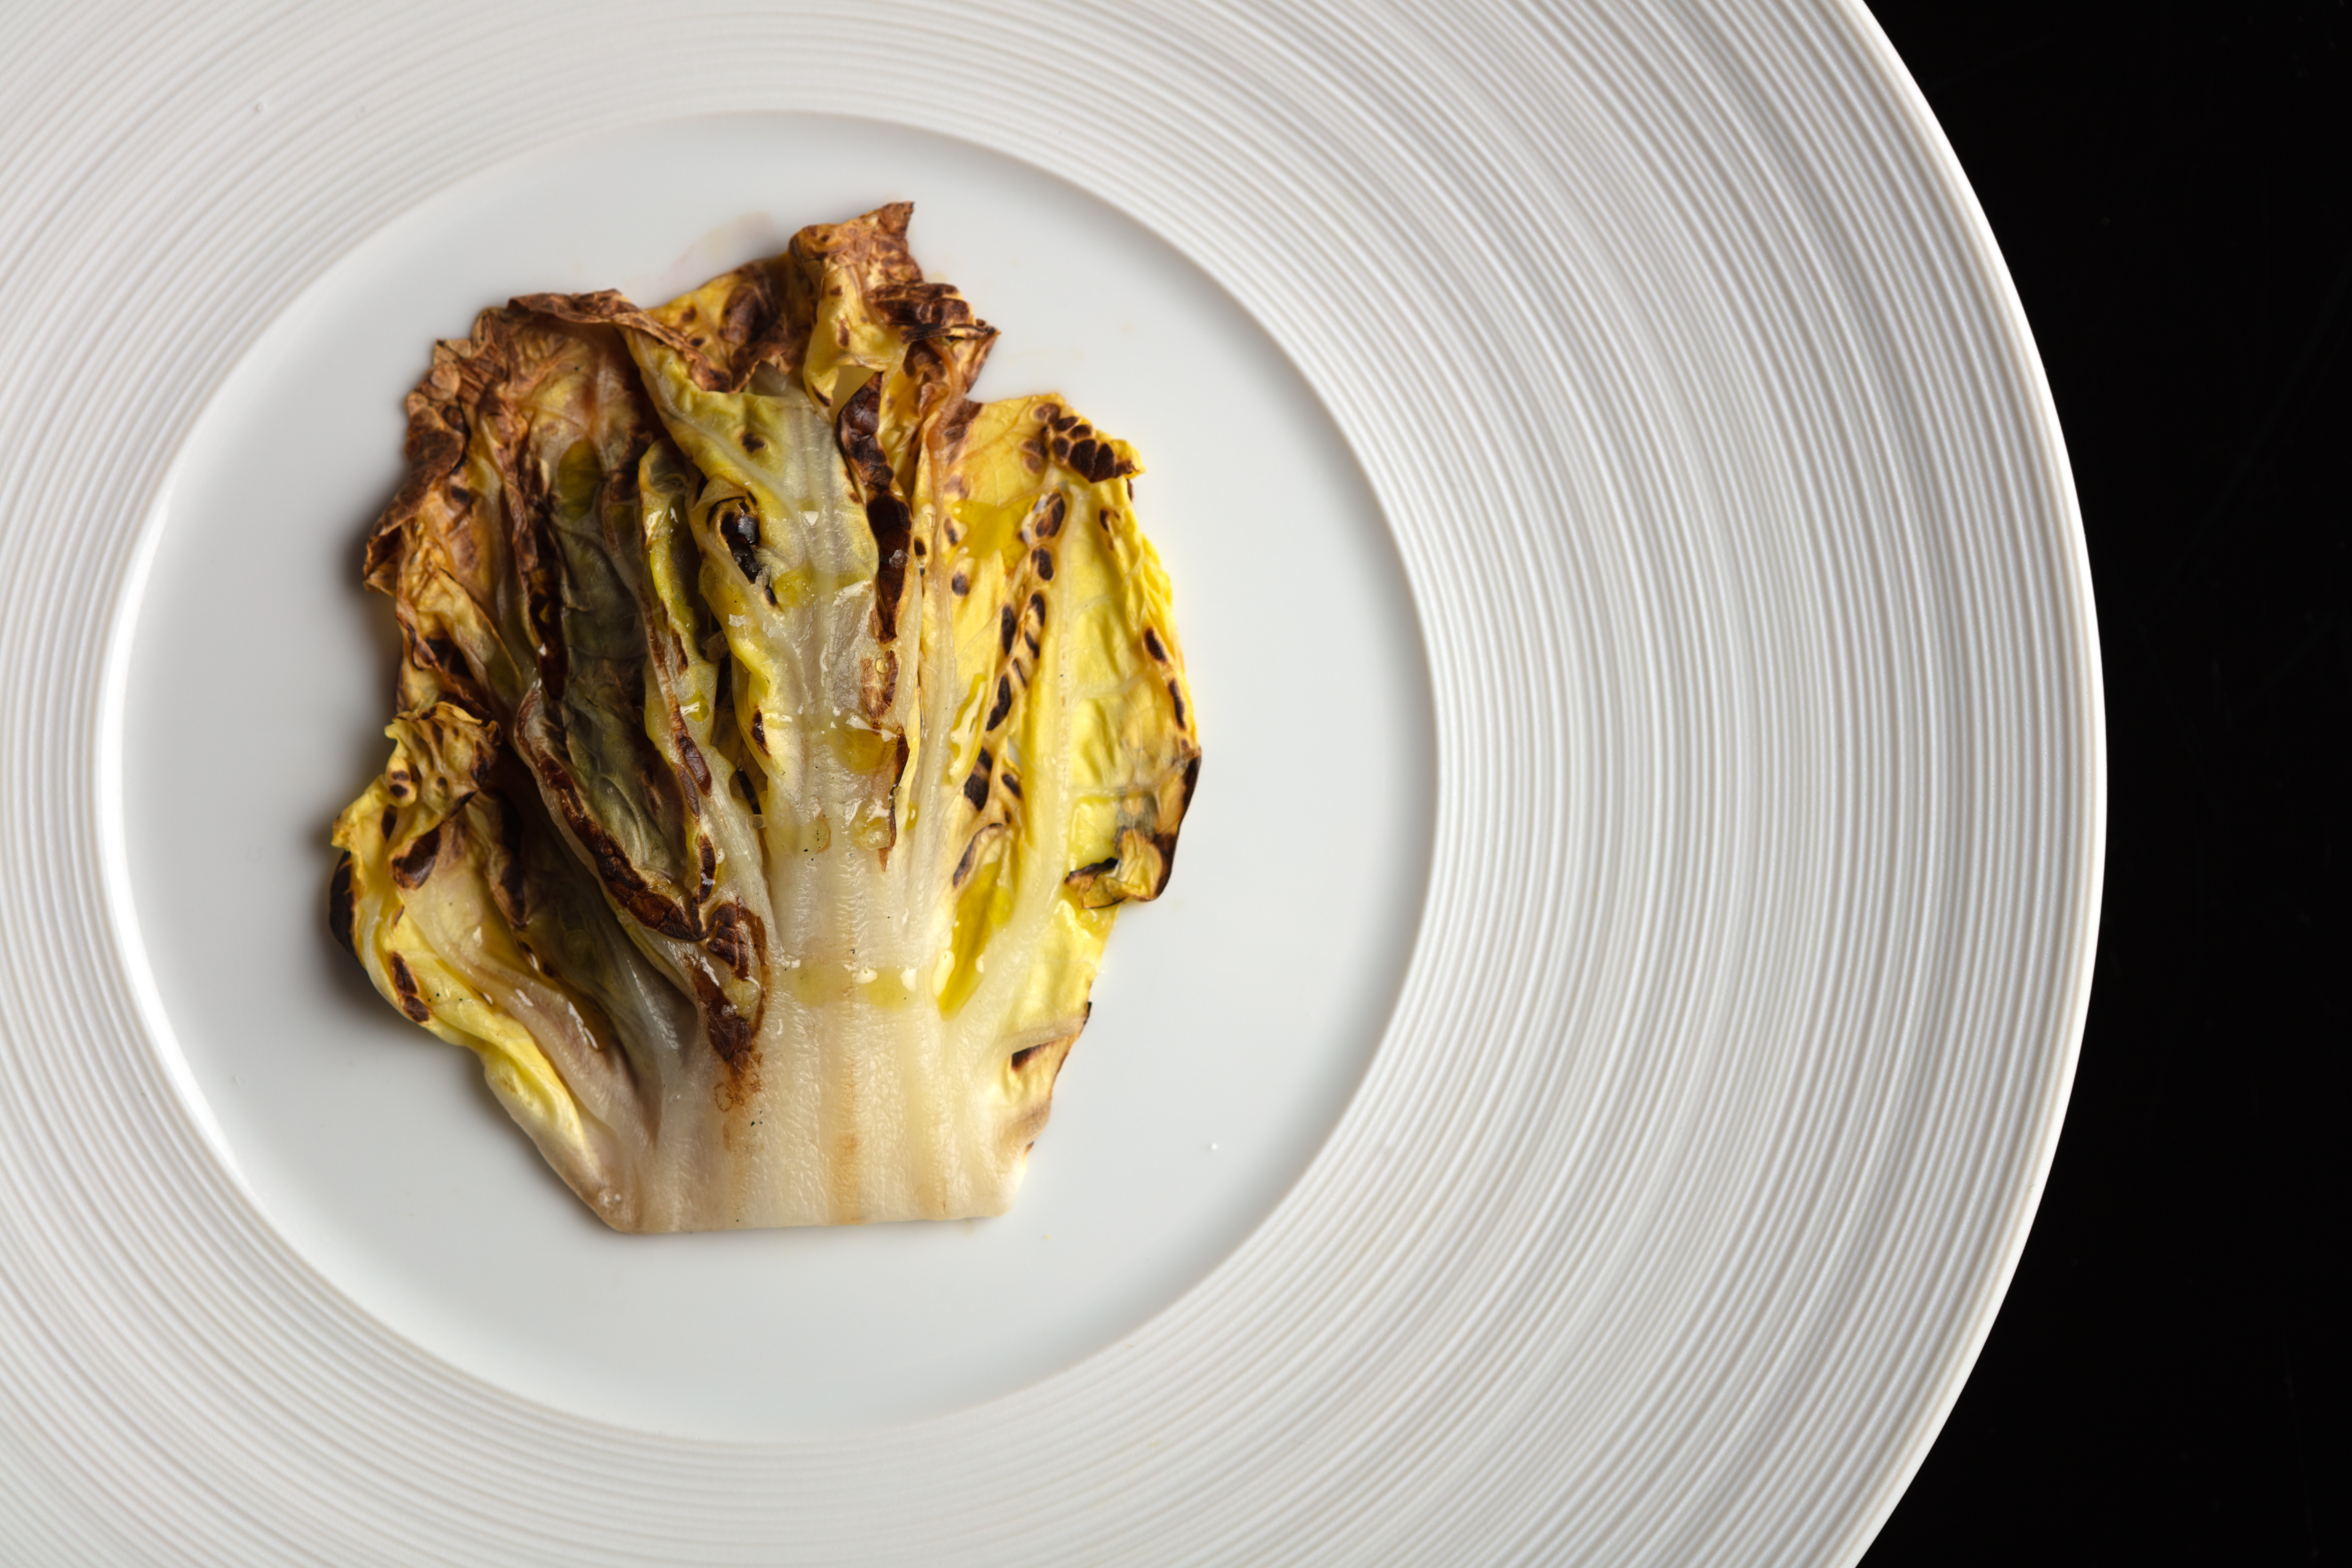 Cabbage burned on a plate from Dialogue